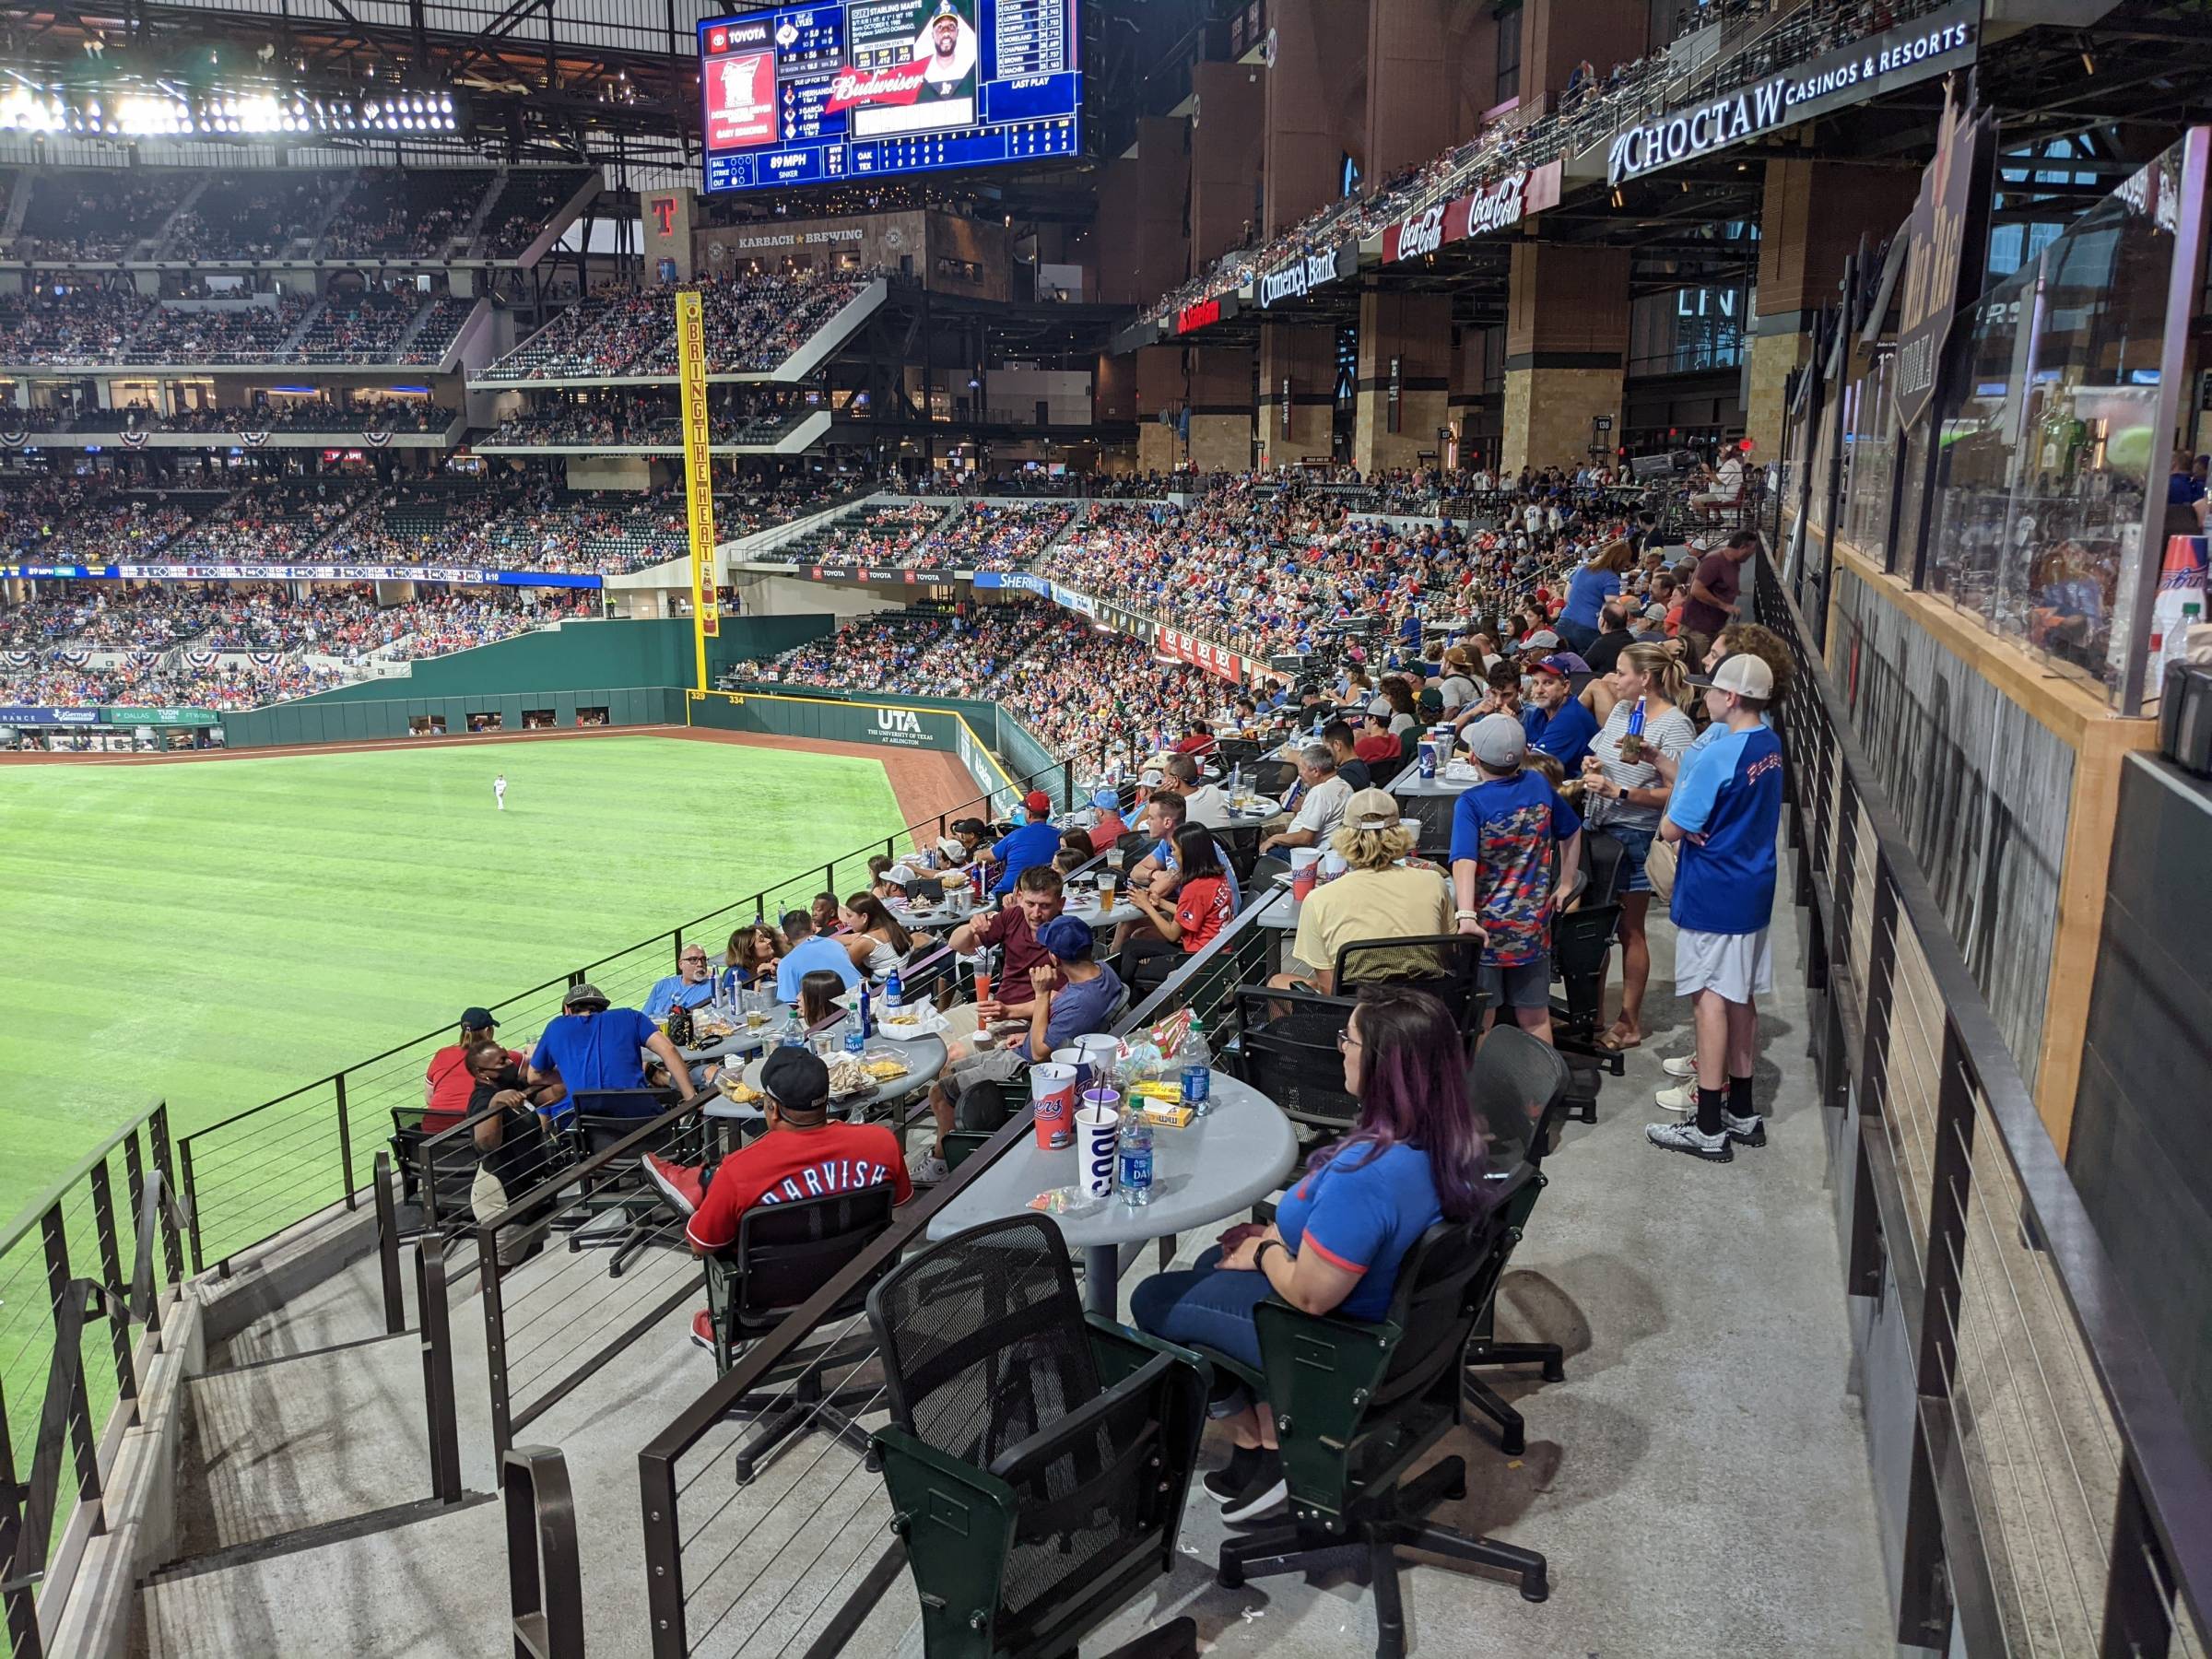 Dallas: Texas Rangers Baseball Game at Globe Life Field | GetYourGuide